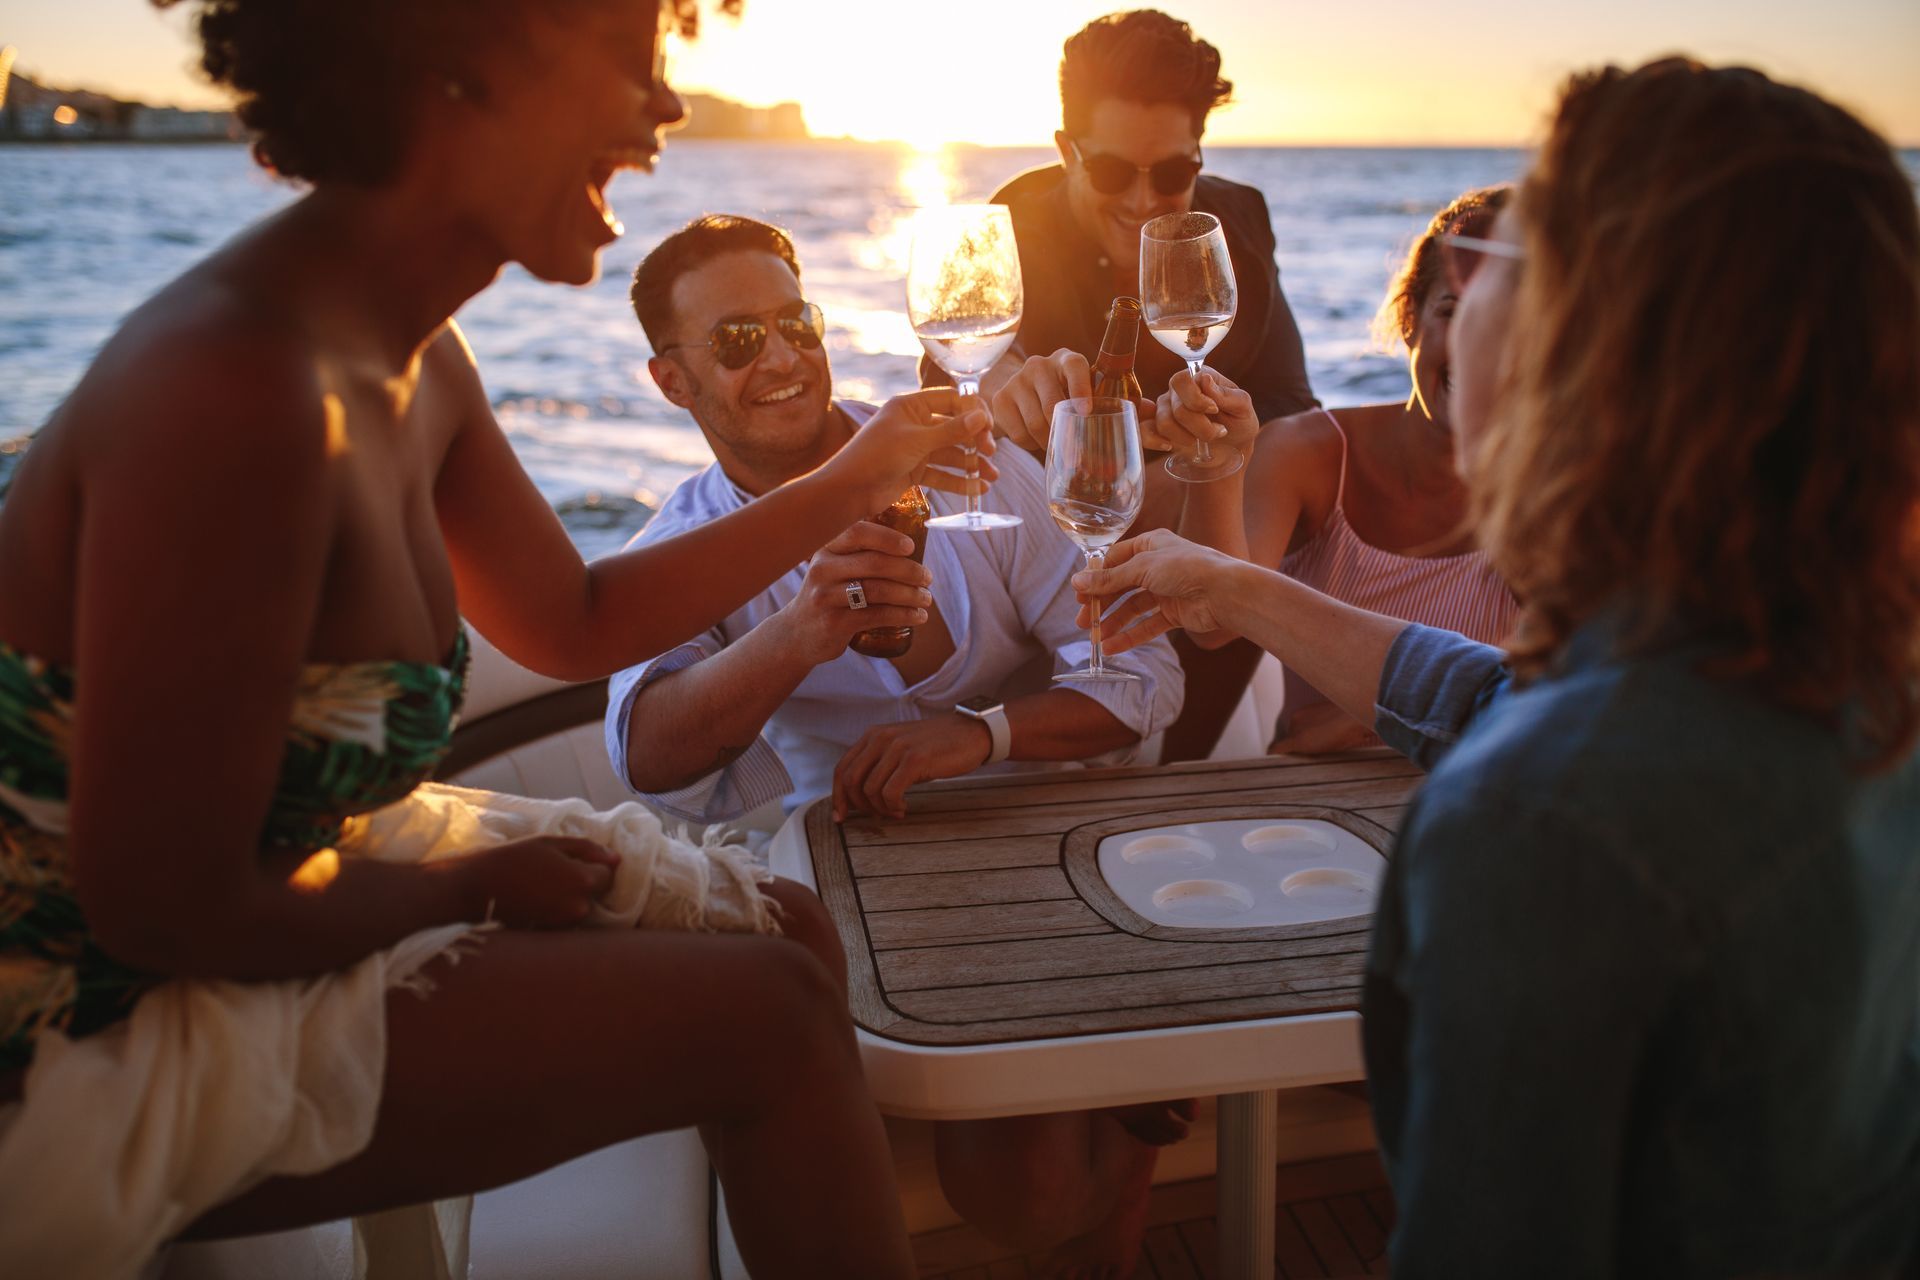 A group of people are toasting with wine glasses on a boat.